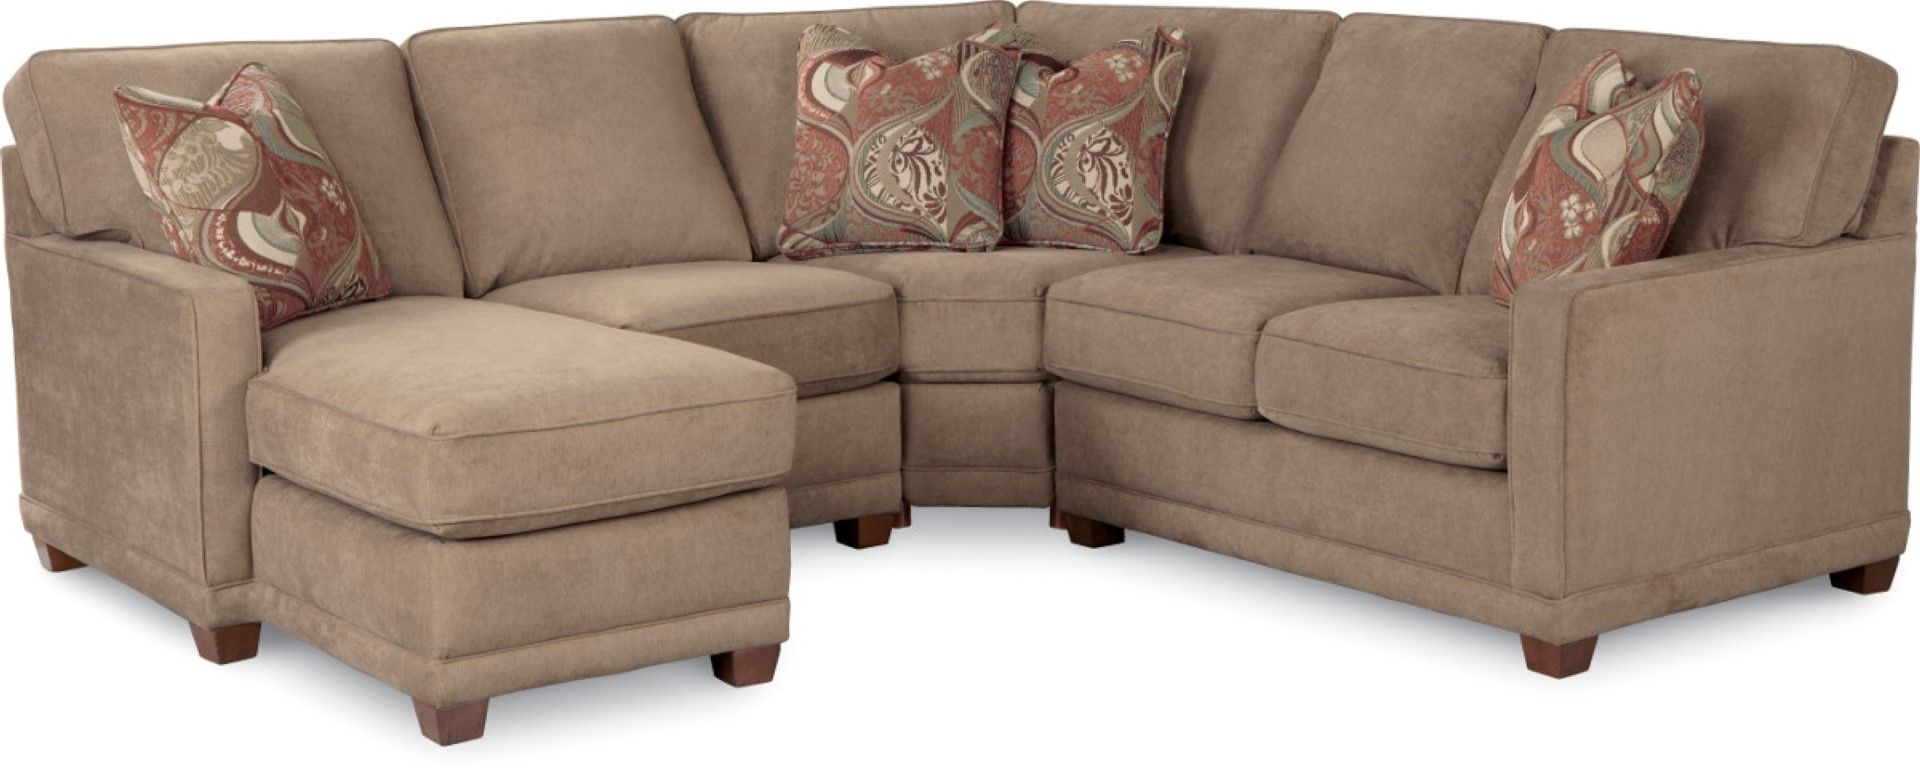 Fashionable Kennedy Sectional Sofa – Town & Country Furniture Throughout Lazy Boy Sectional Sofas (View 1 of 15)